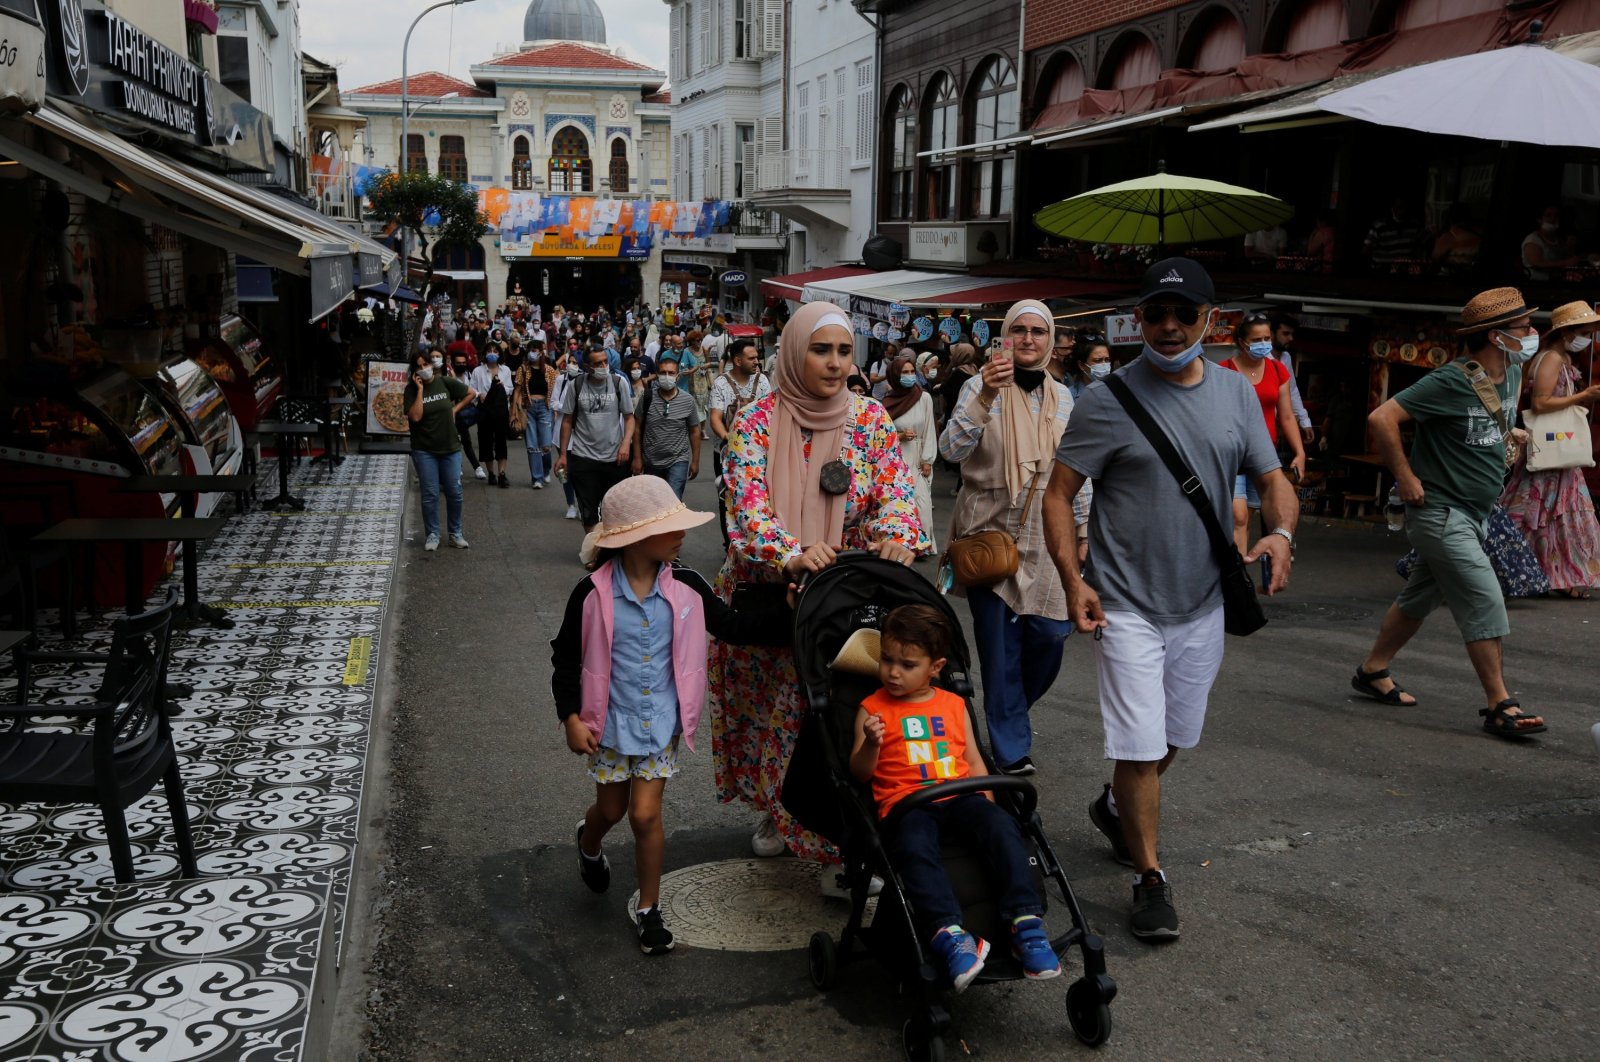 Foreign tourists visit Büyükada, the largest of the Princes' Islands in the Marmara Sea, off Istanbul, Turkey, July 14, 2021. (Reuters Photo)